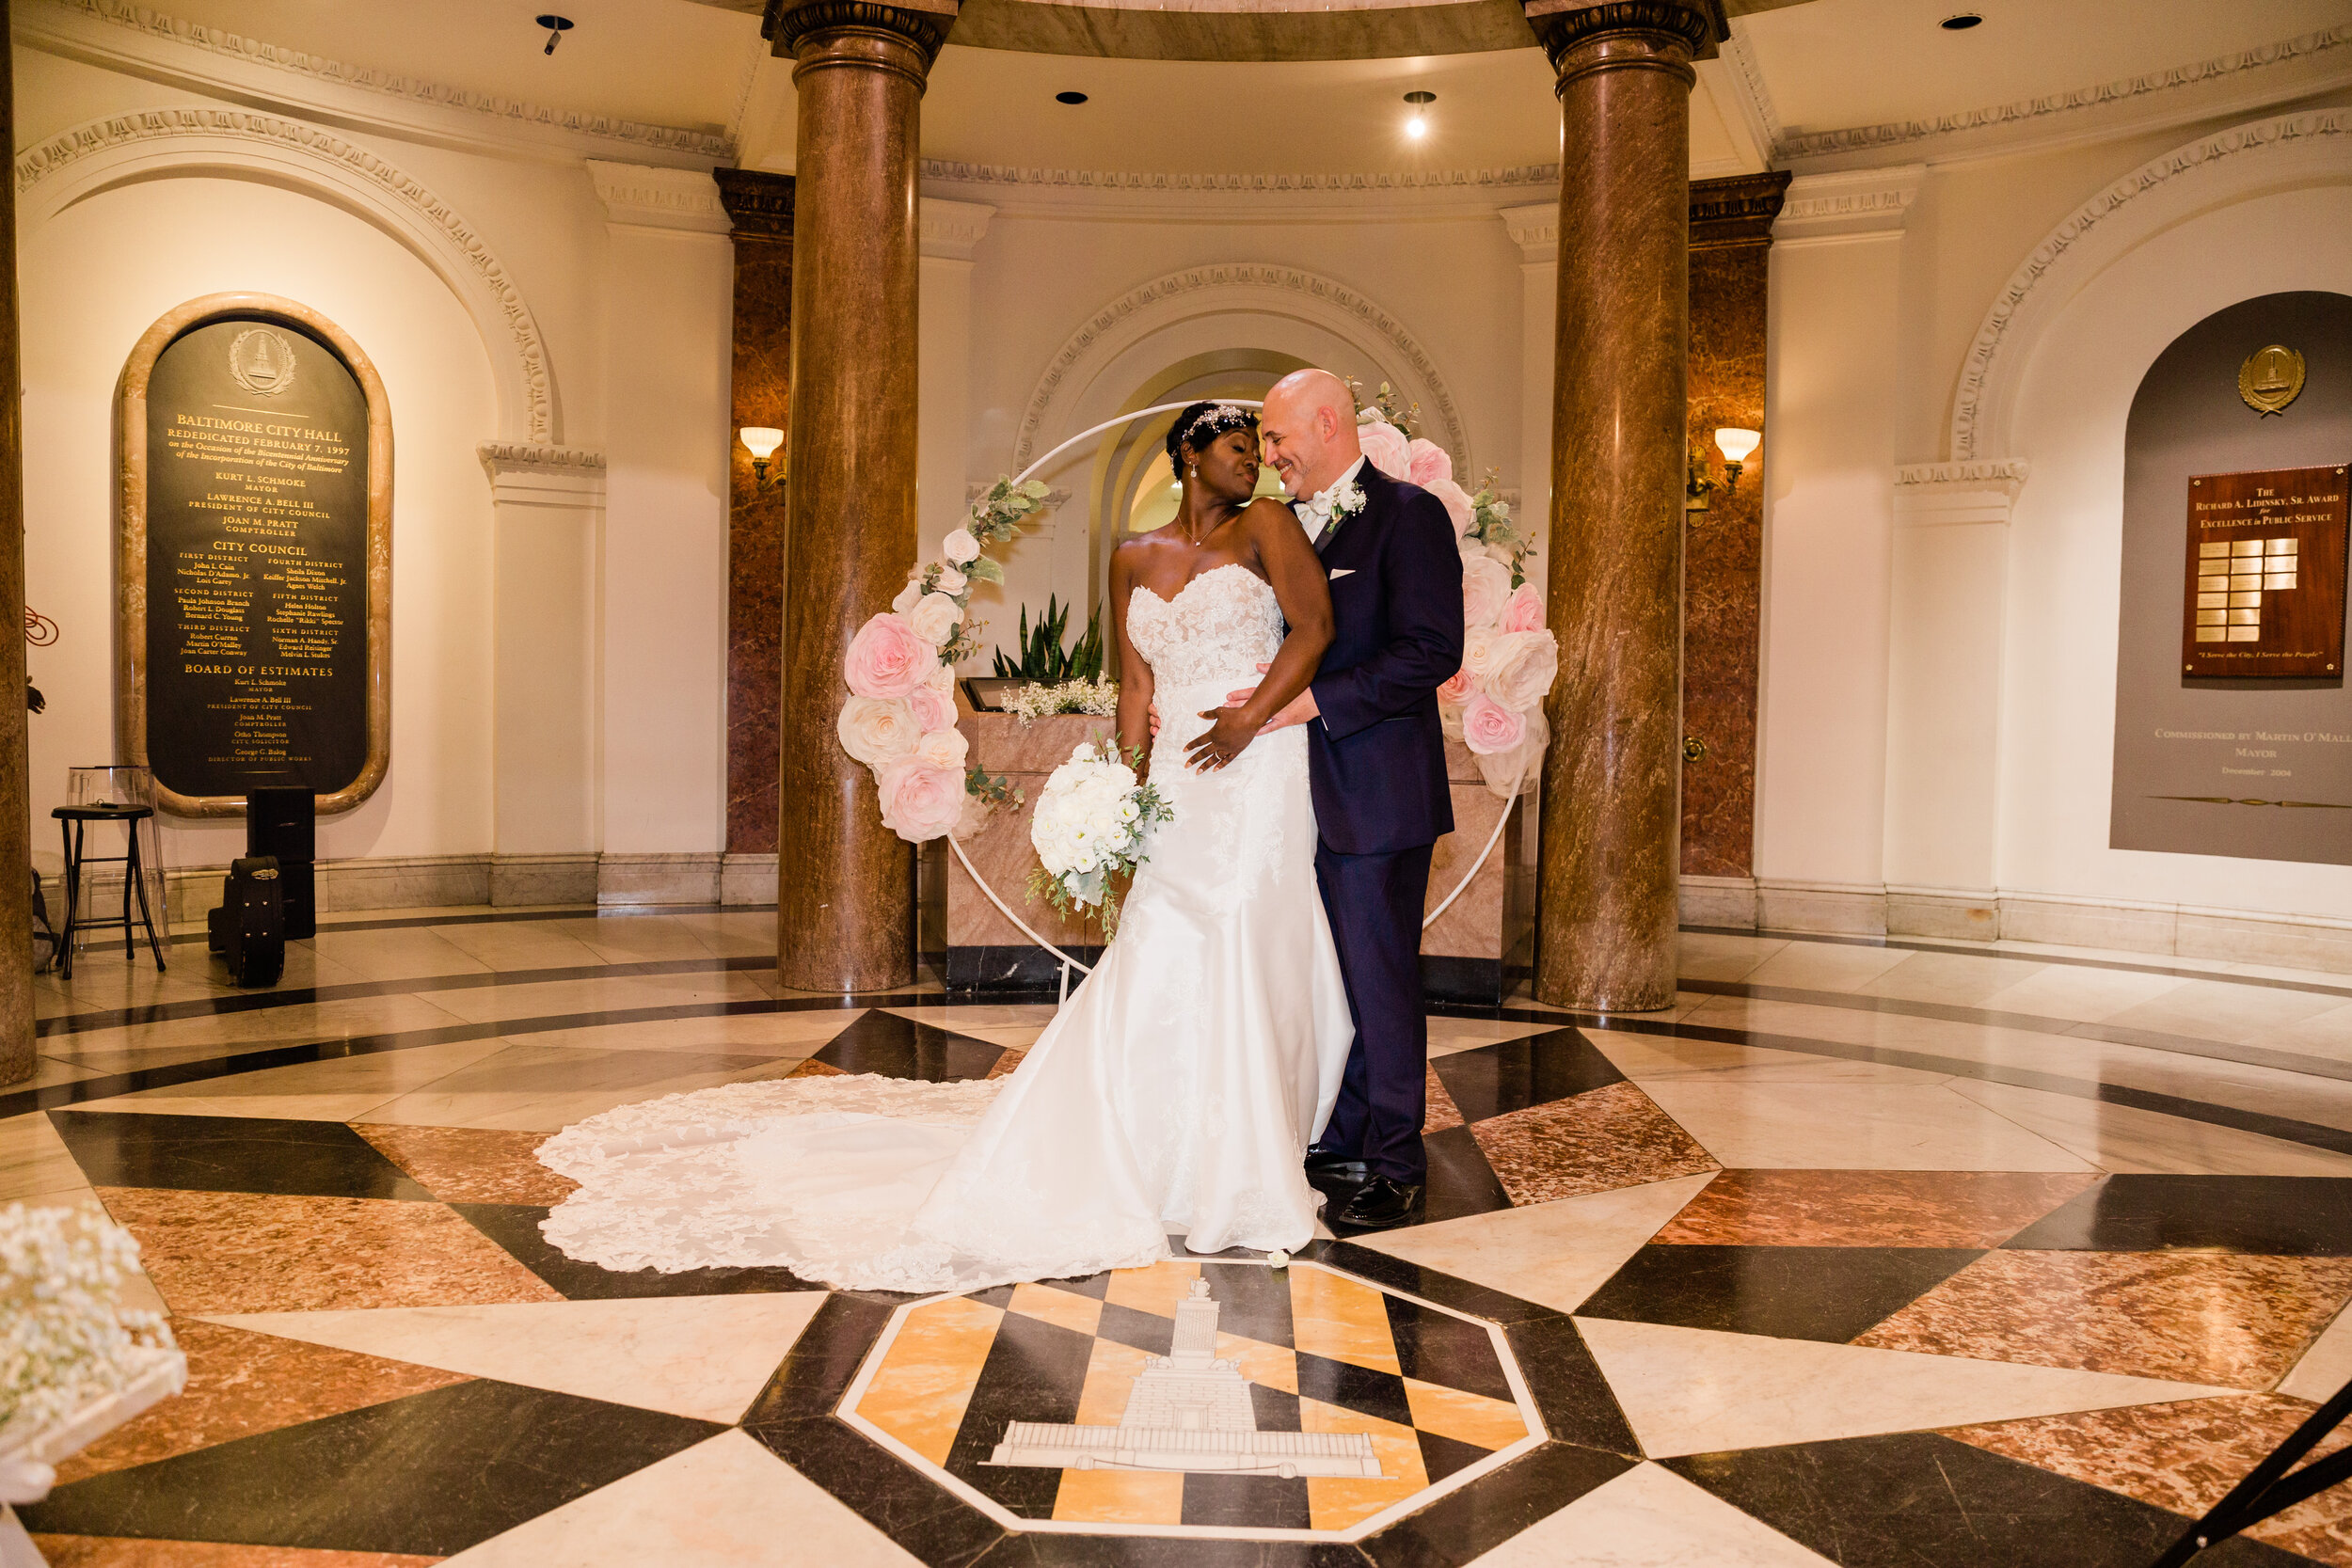 get married in baltimore city hall shot by megapixels media biracial couple wedding photographers maryland-84.jpg